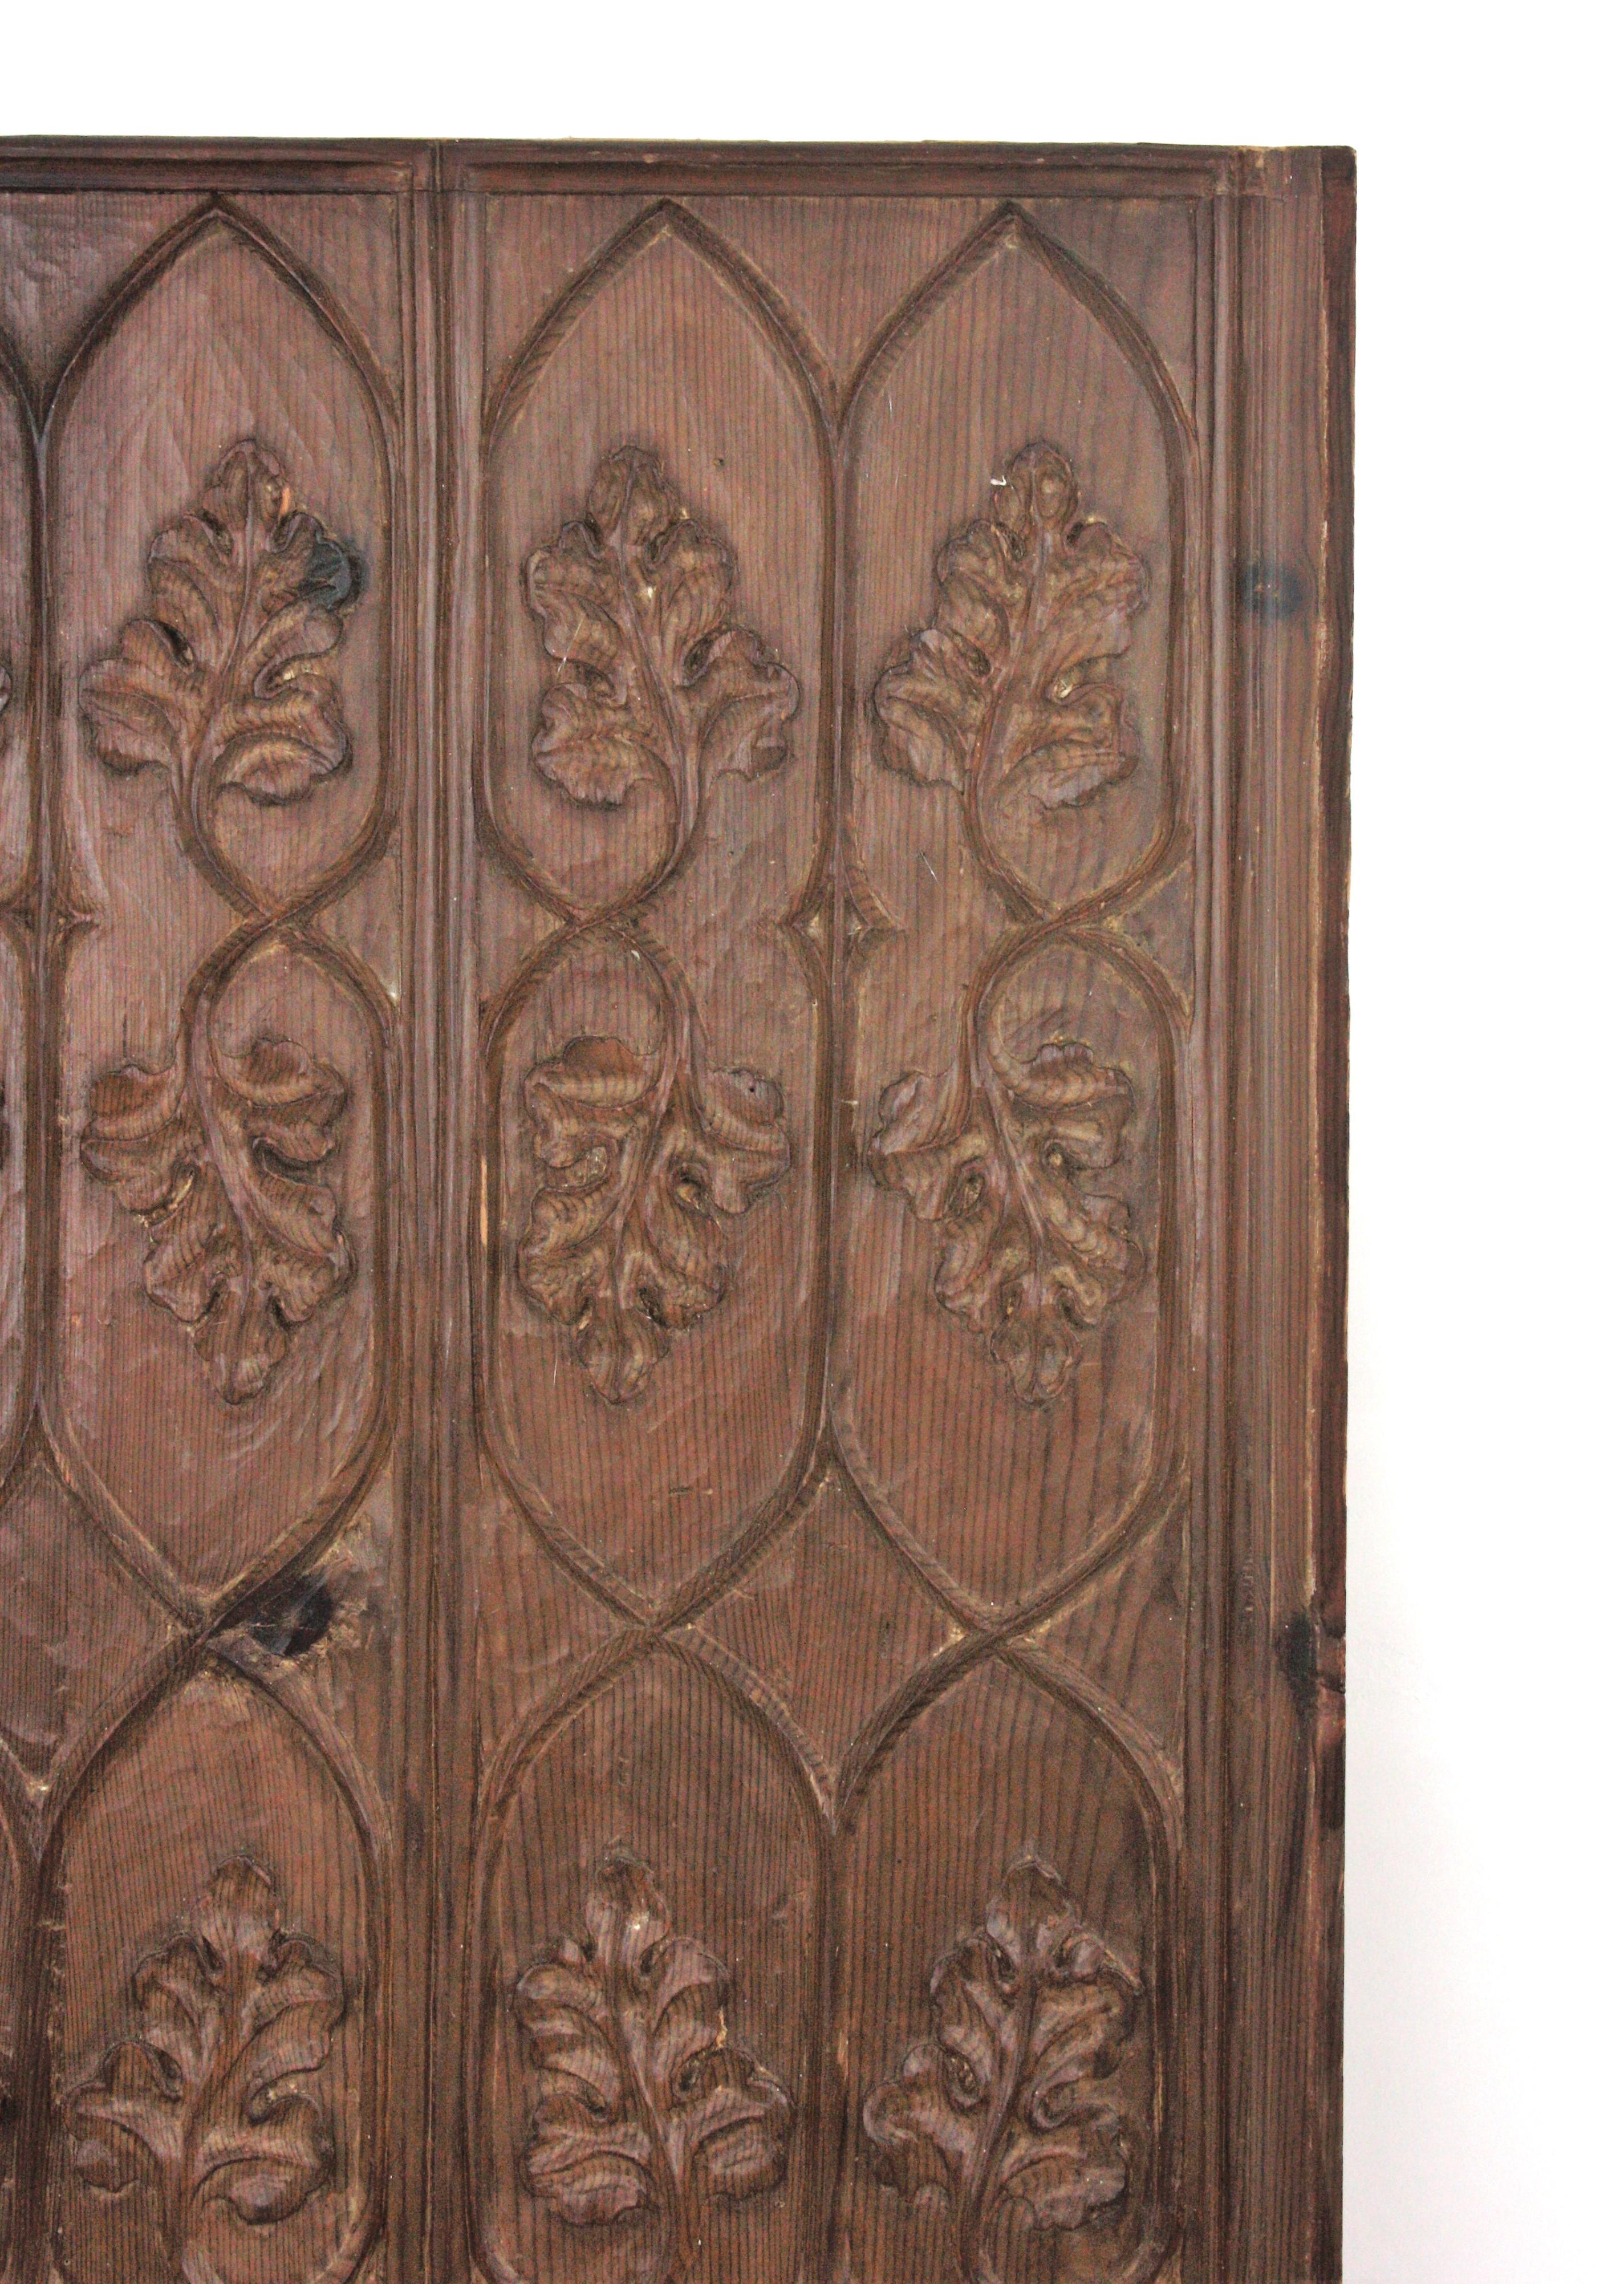 Spanish Hand-Carved Walnut Wood Decorative Wall Panel with Foliage Motifs For Sale 3